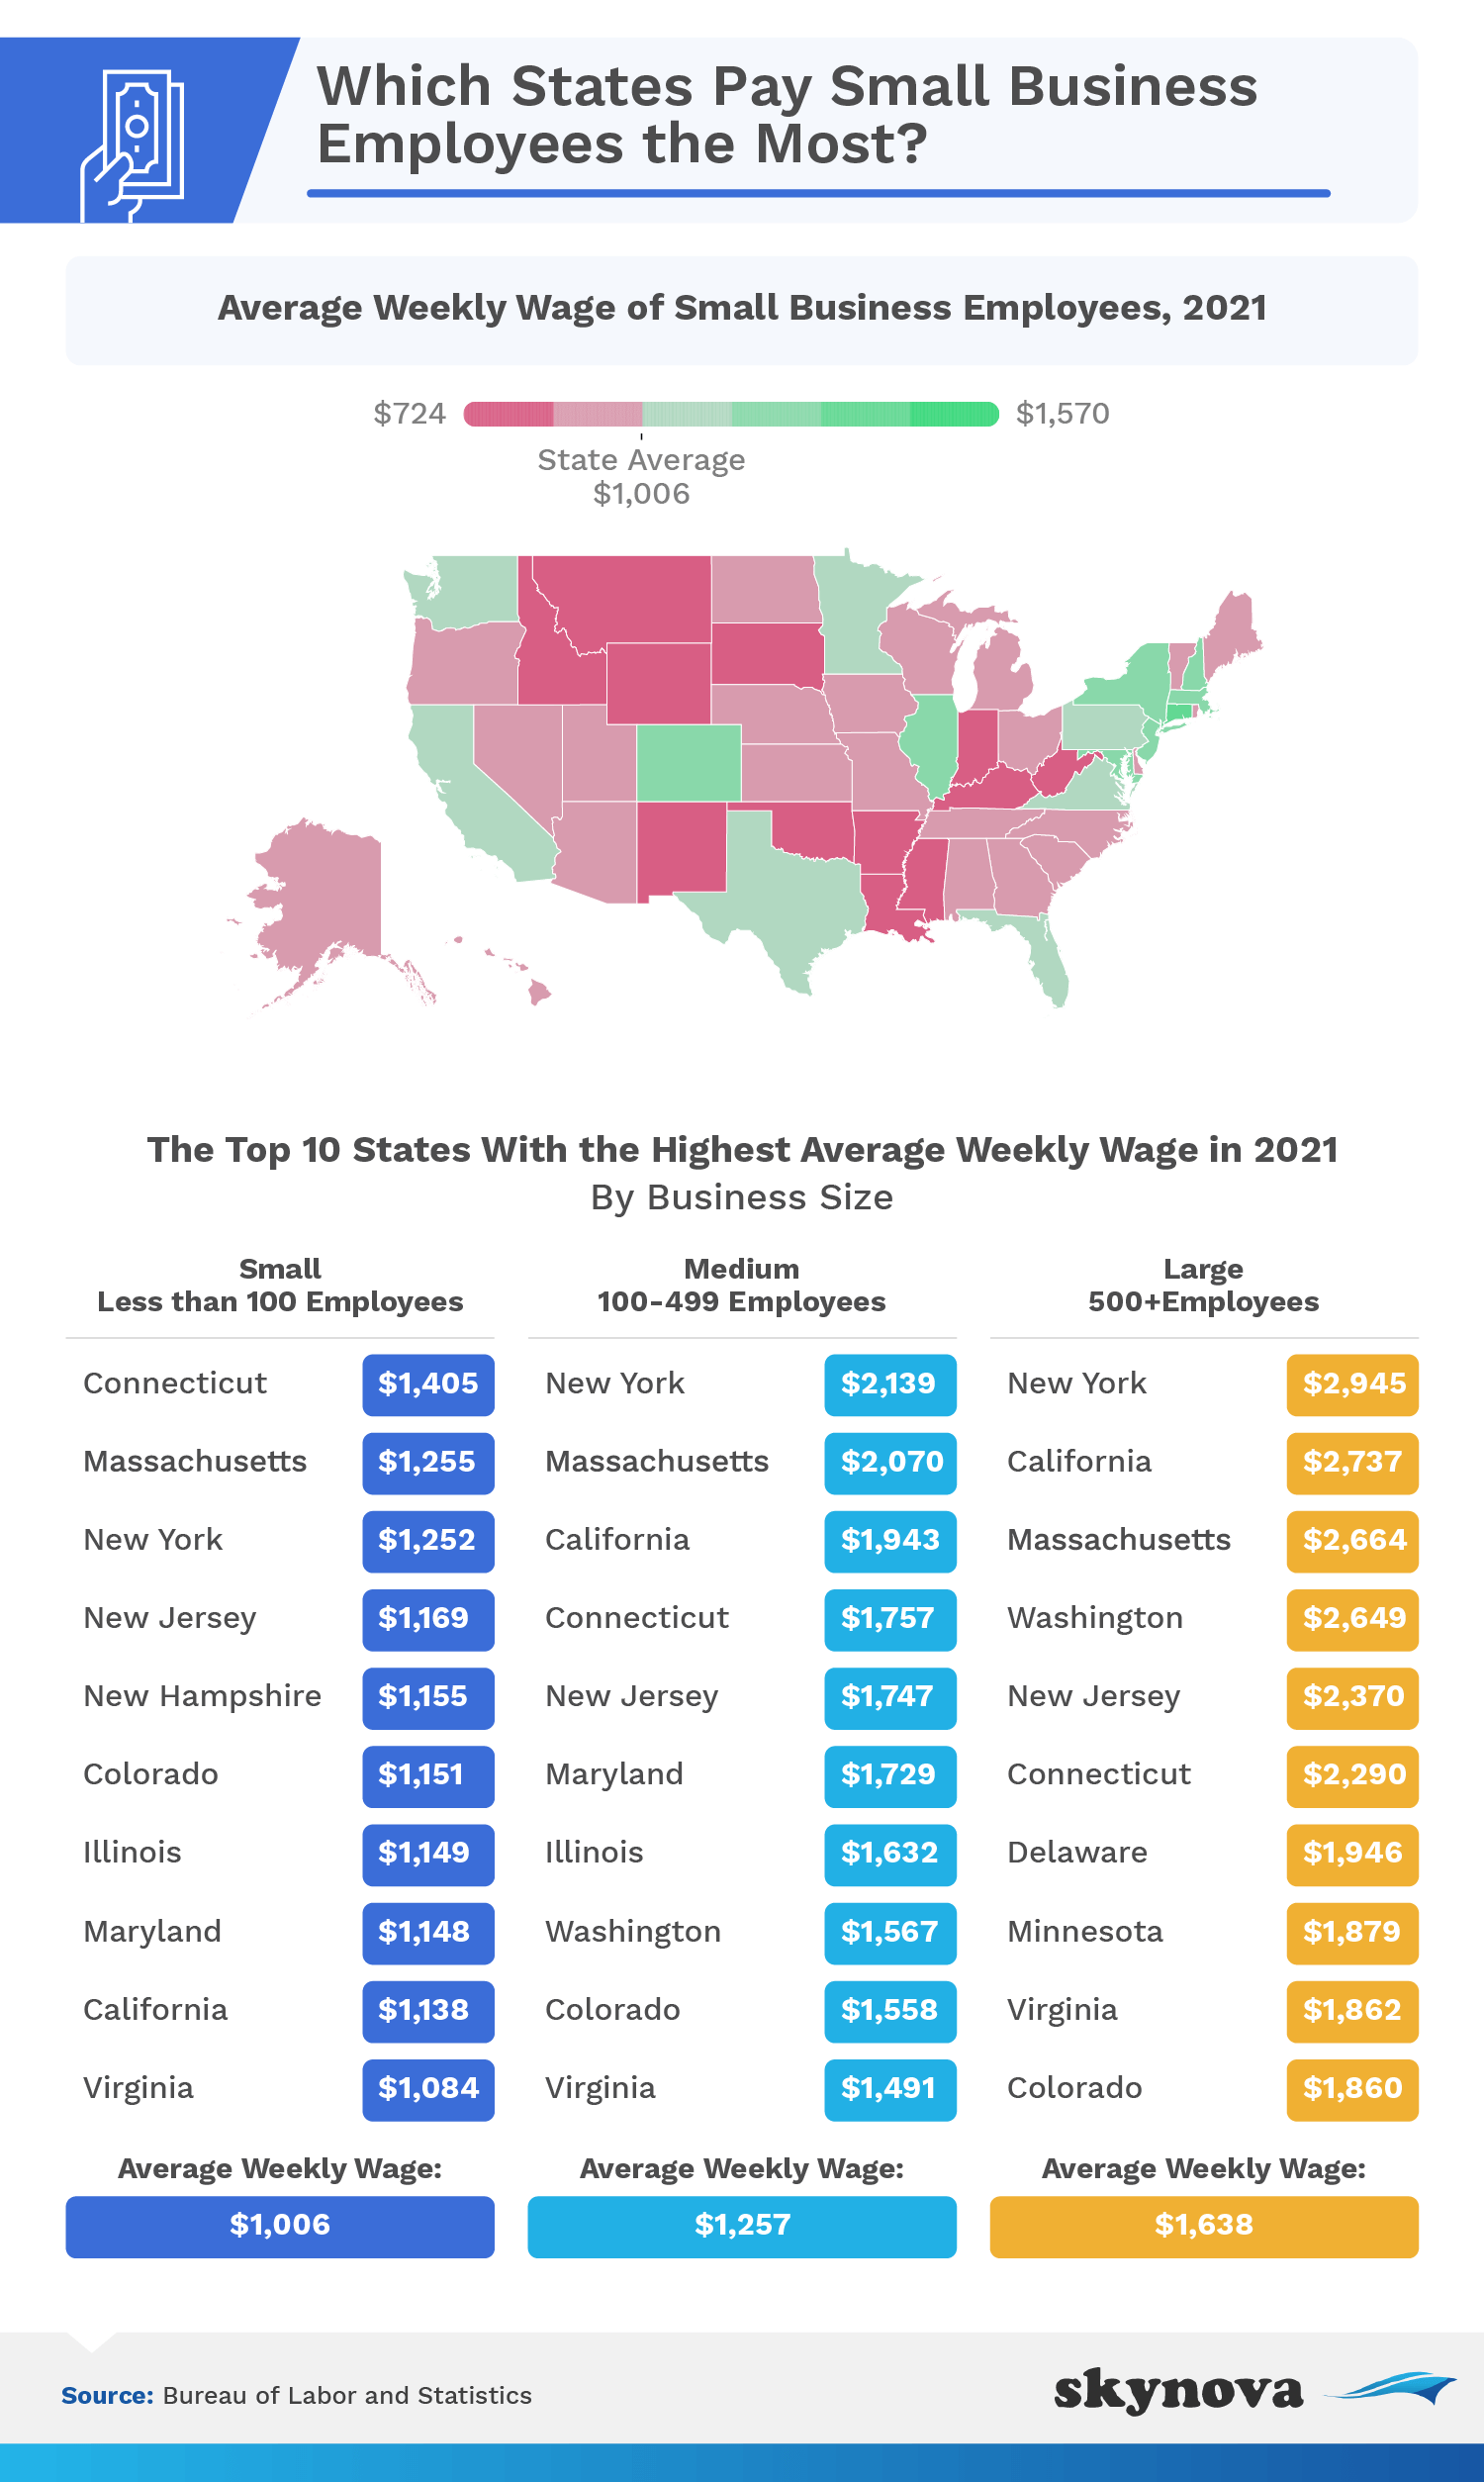 Which states pay small business employees the most?